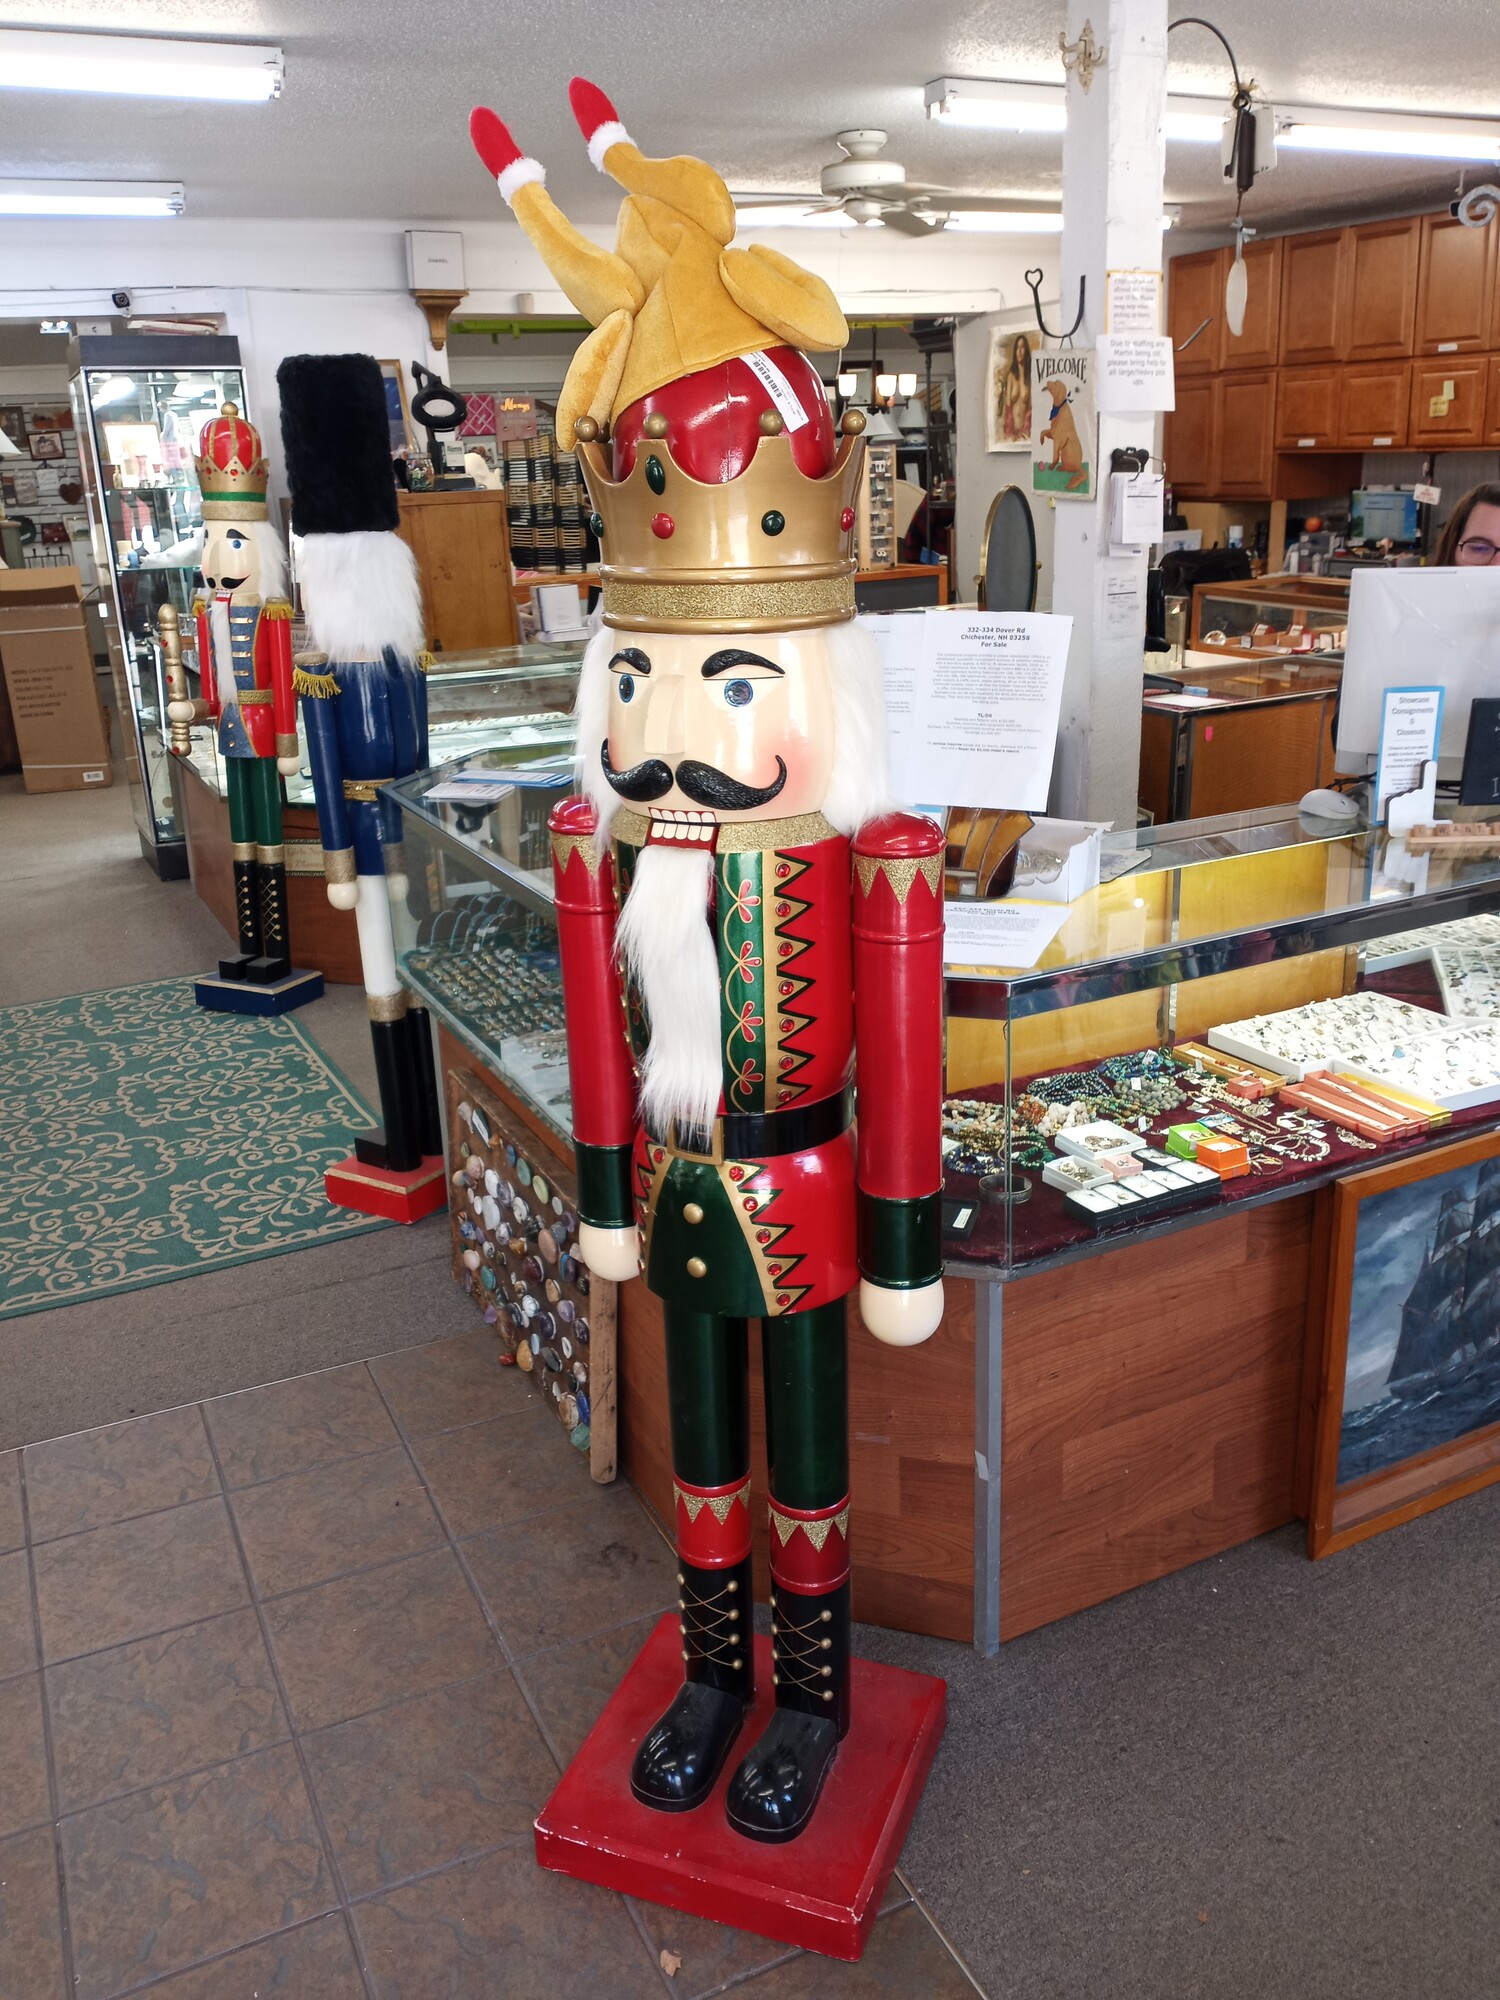 6 Ft Solid wood Nutcracker, @ 20 years old.